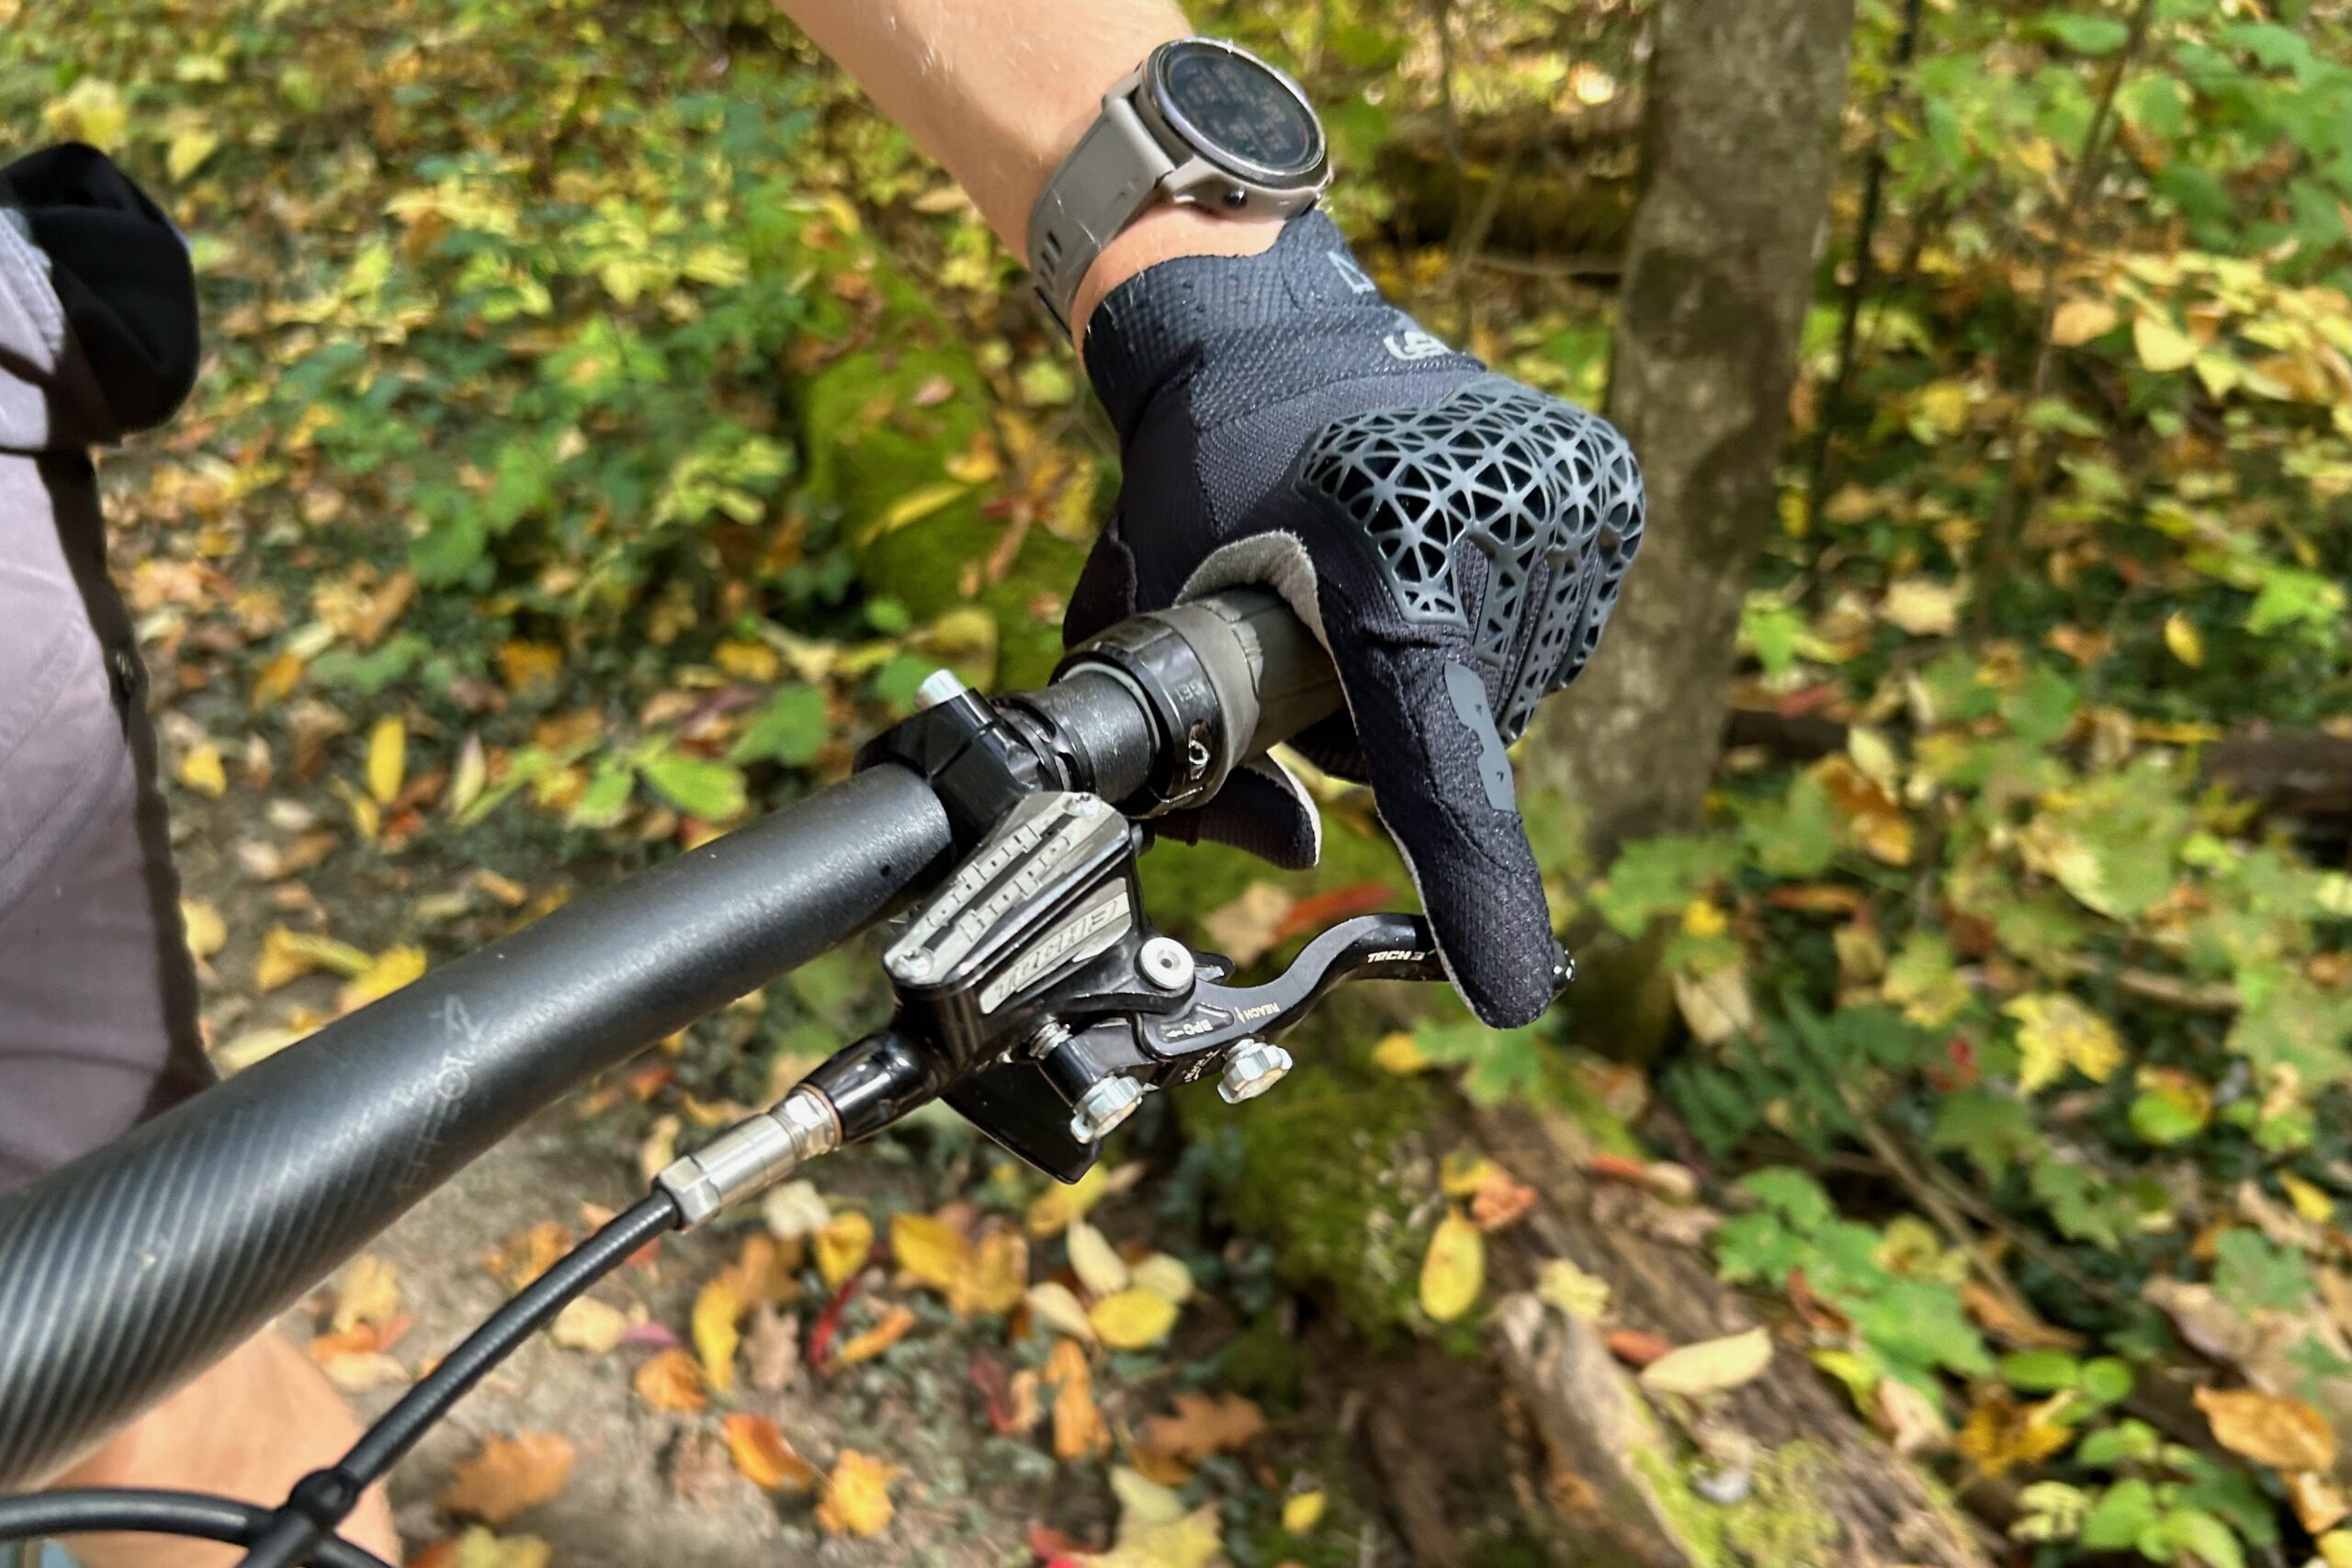 The Leatt MTB 4.0 Lite gloves and the Airflex hand protection